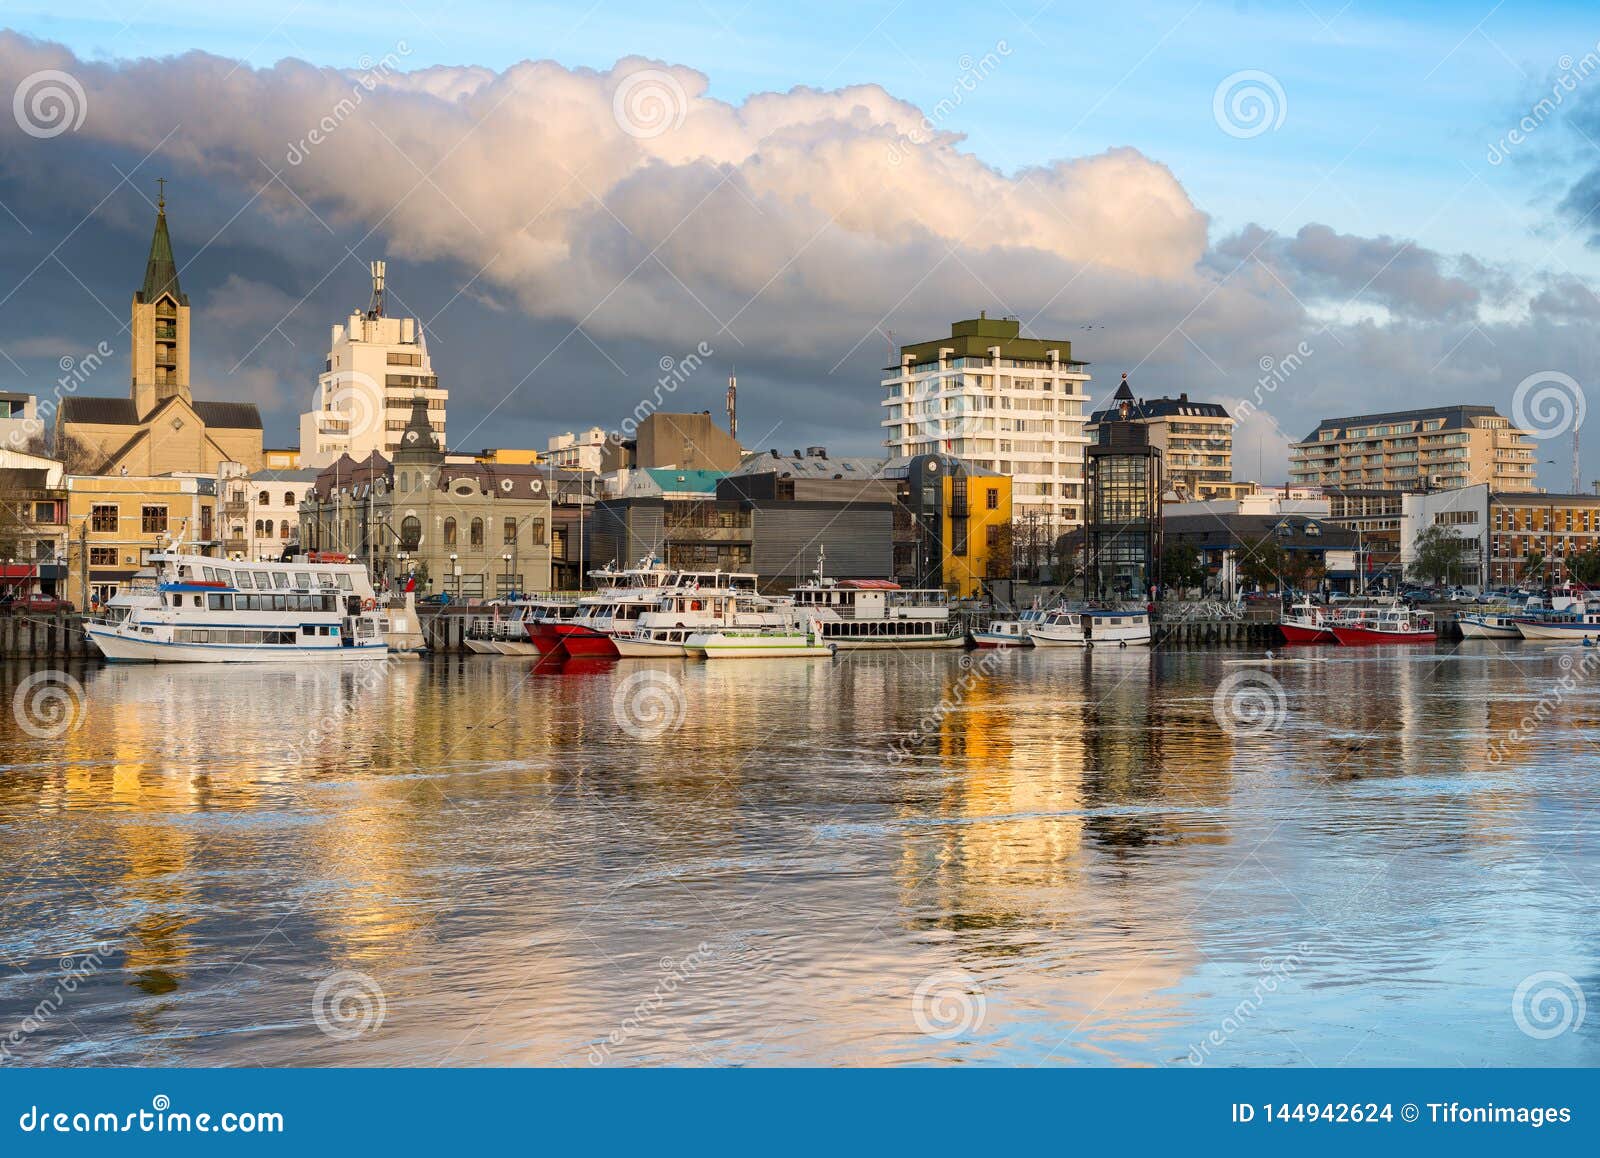 the city of valdivia at the shore of calle-calle river in chile